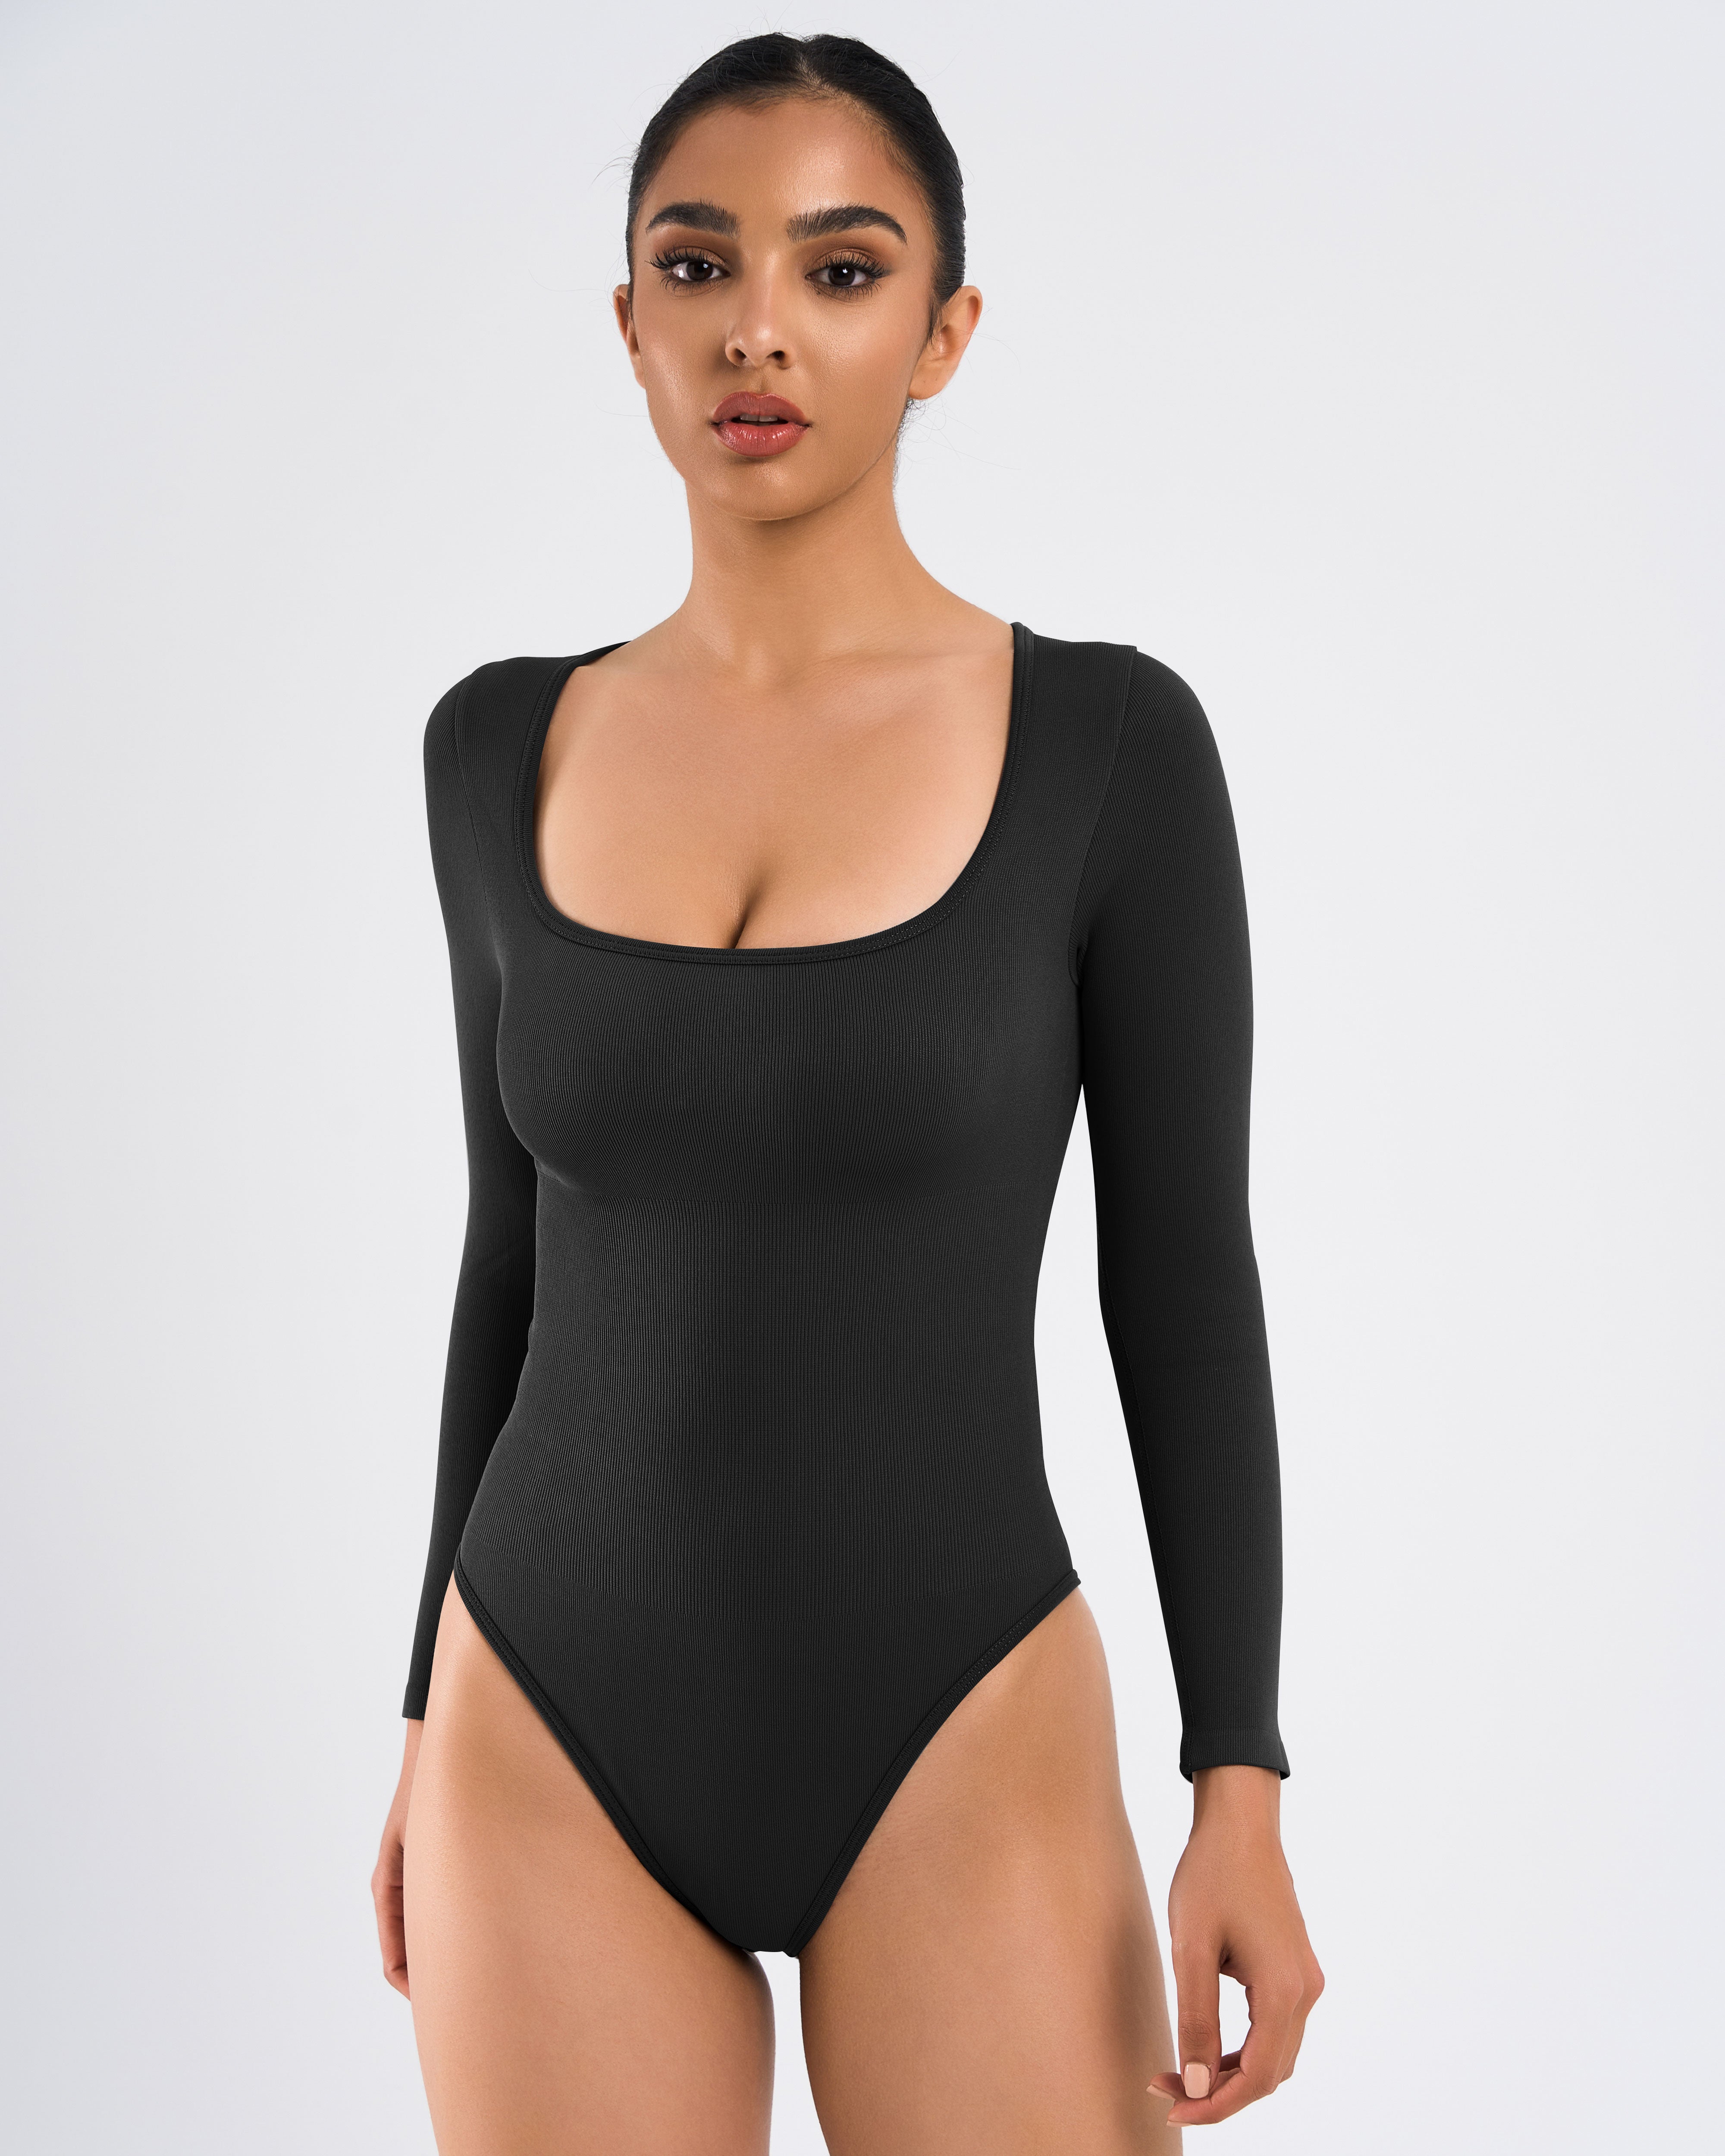 Bodysuit try on after losing 300 lbs #oqq #oqqbodysuit